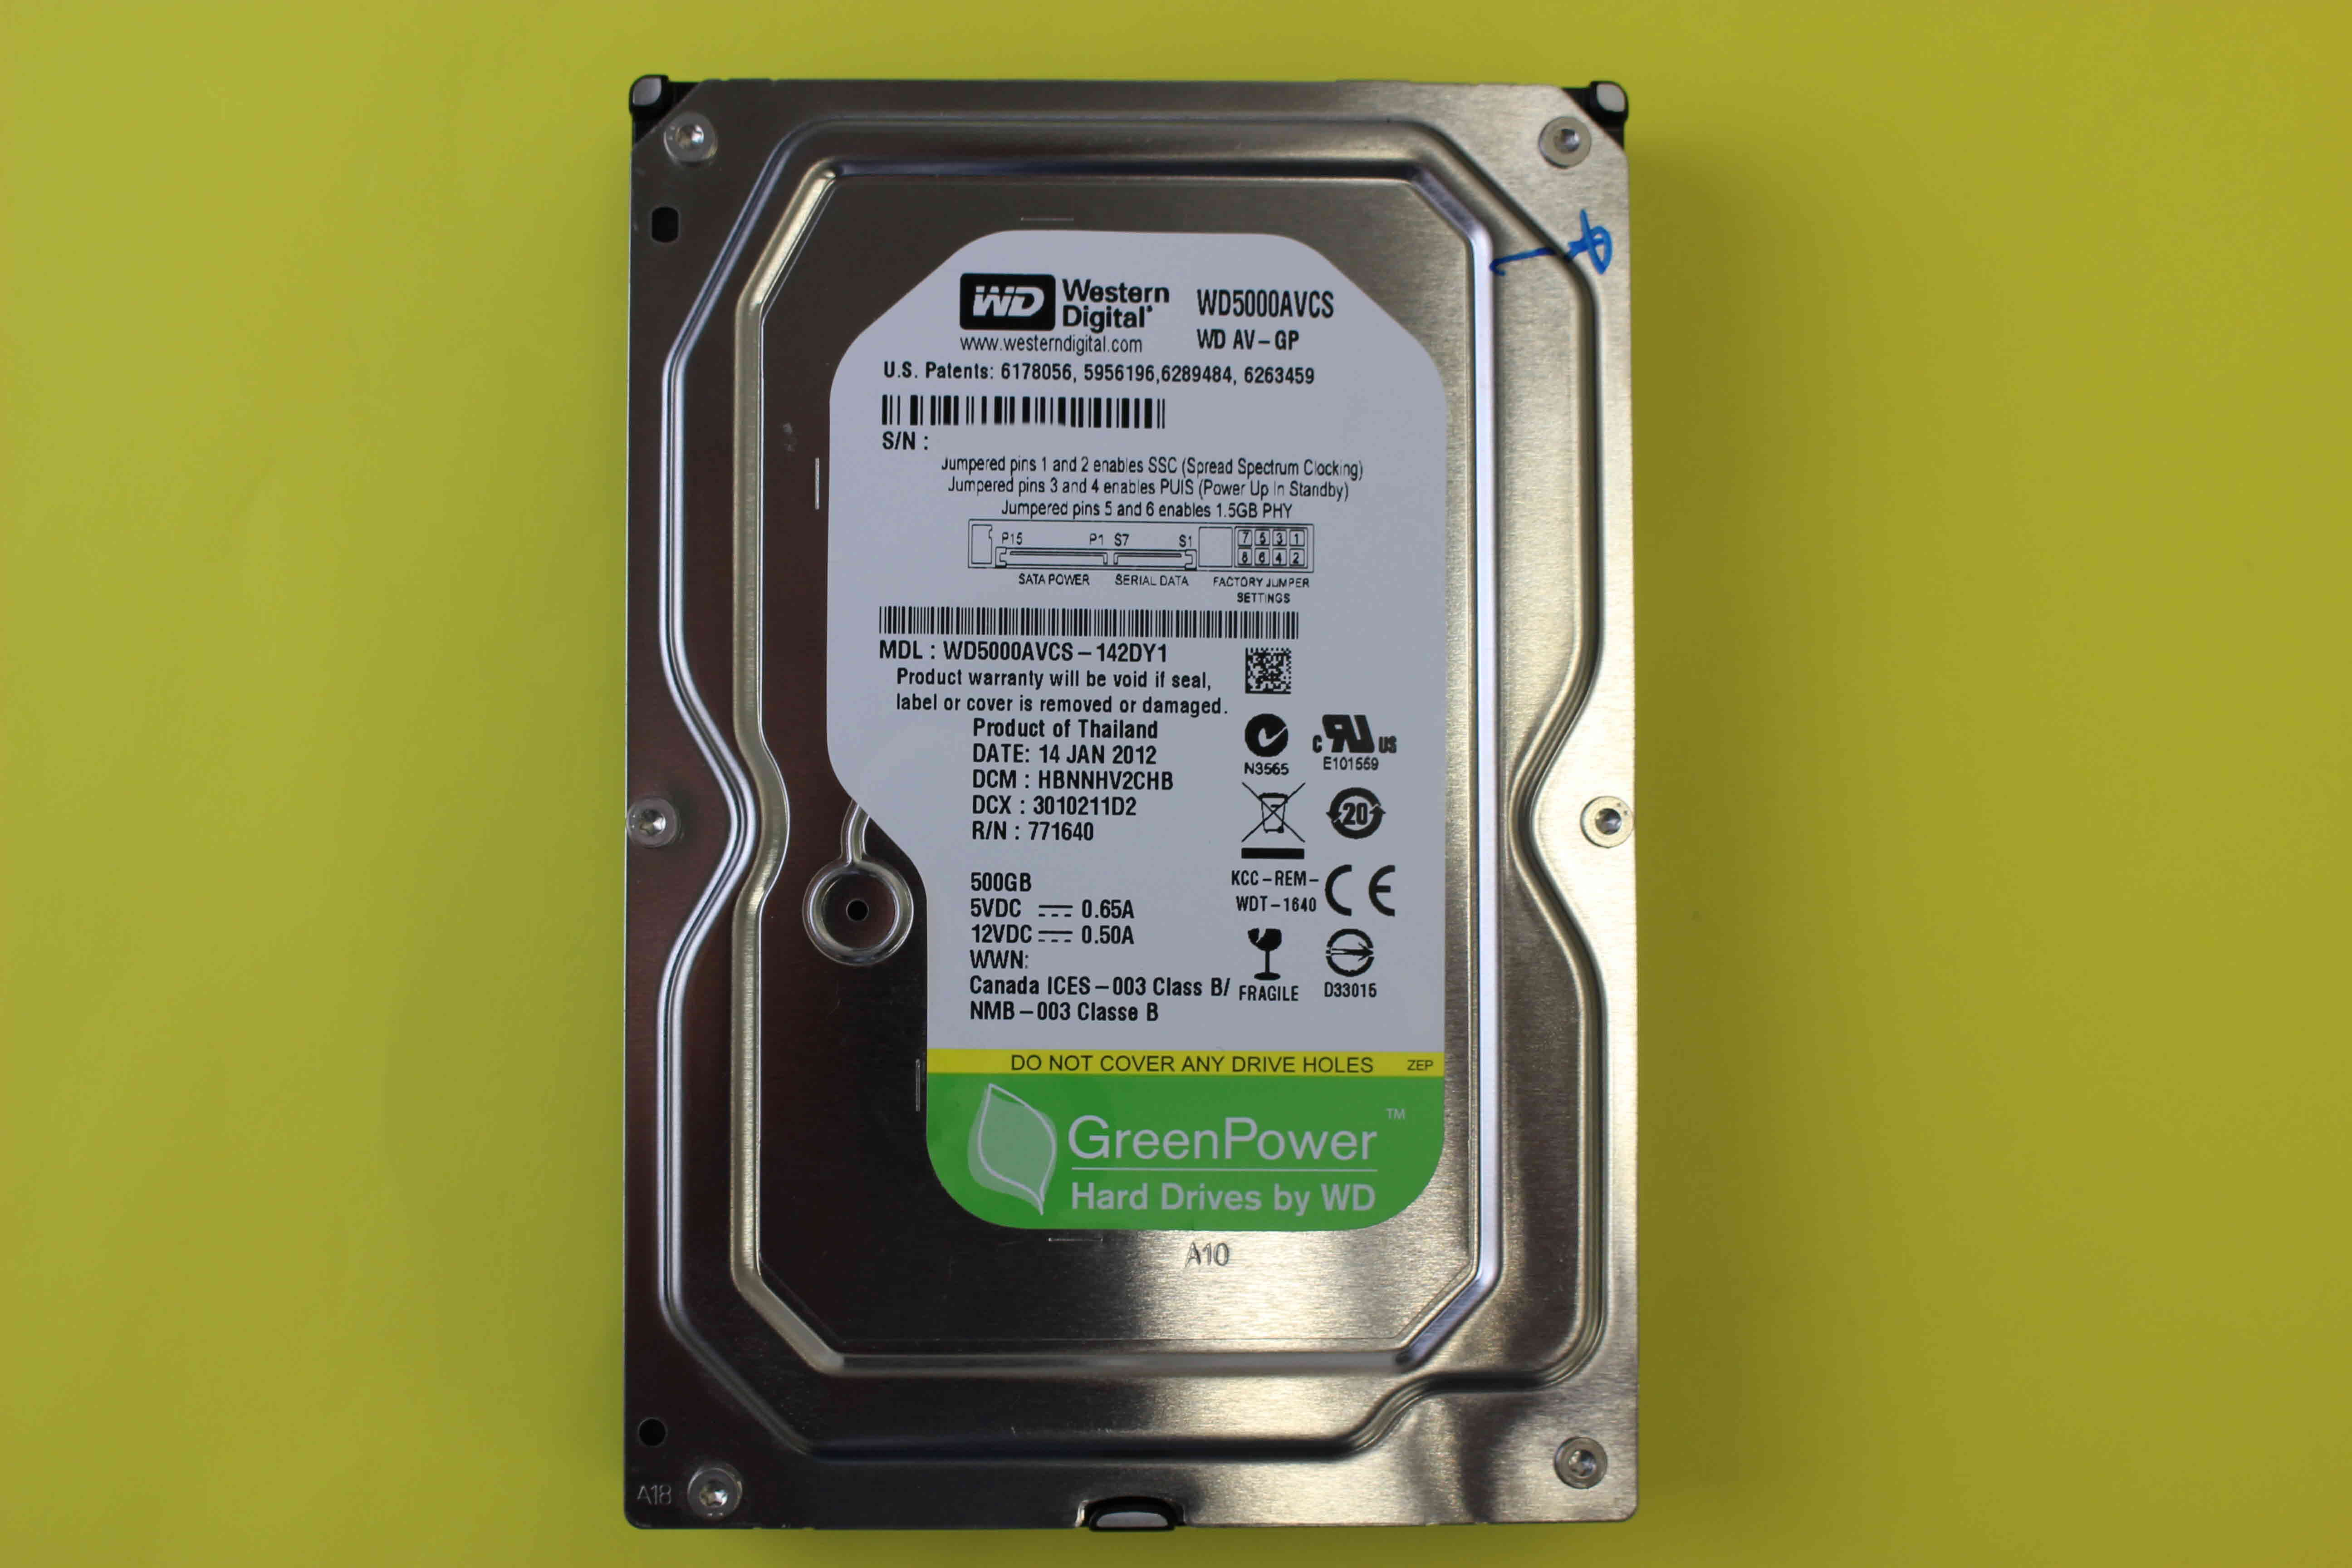 wd5000avcs-142dy1-recovery